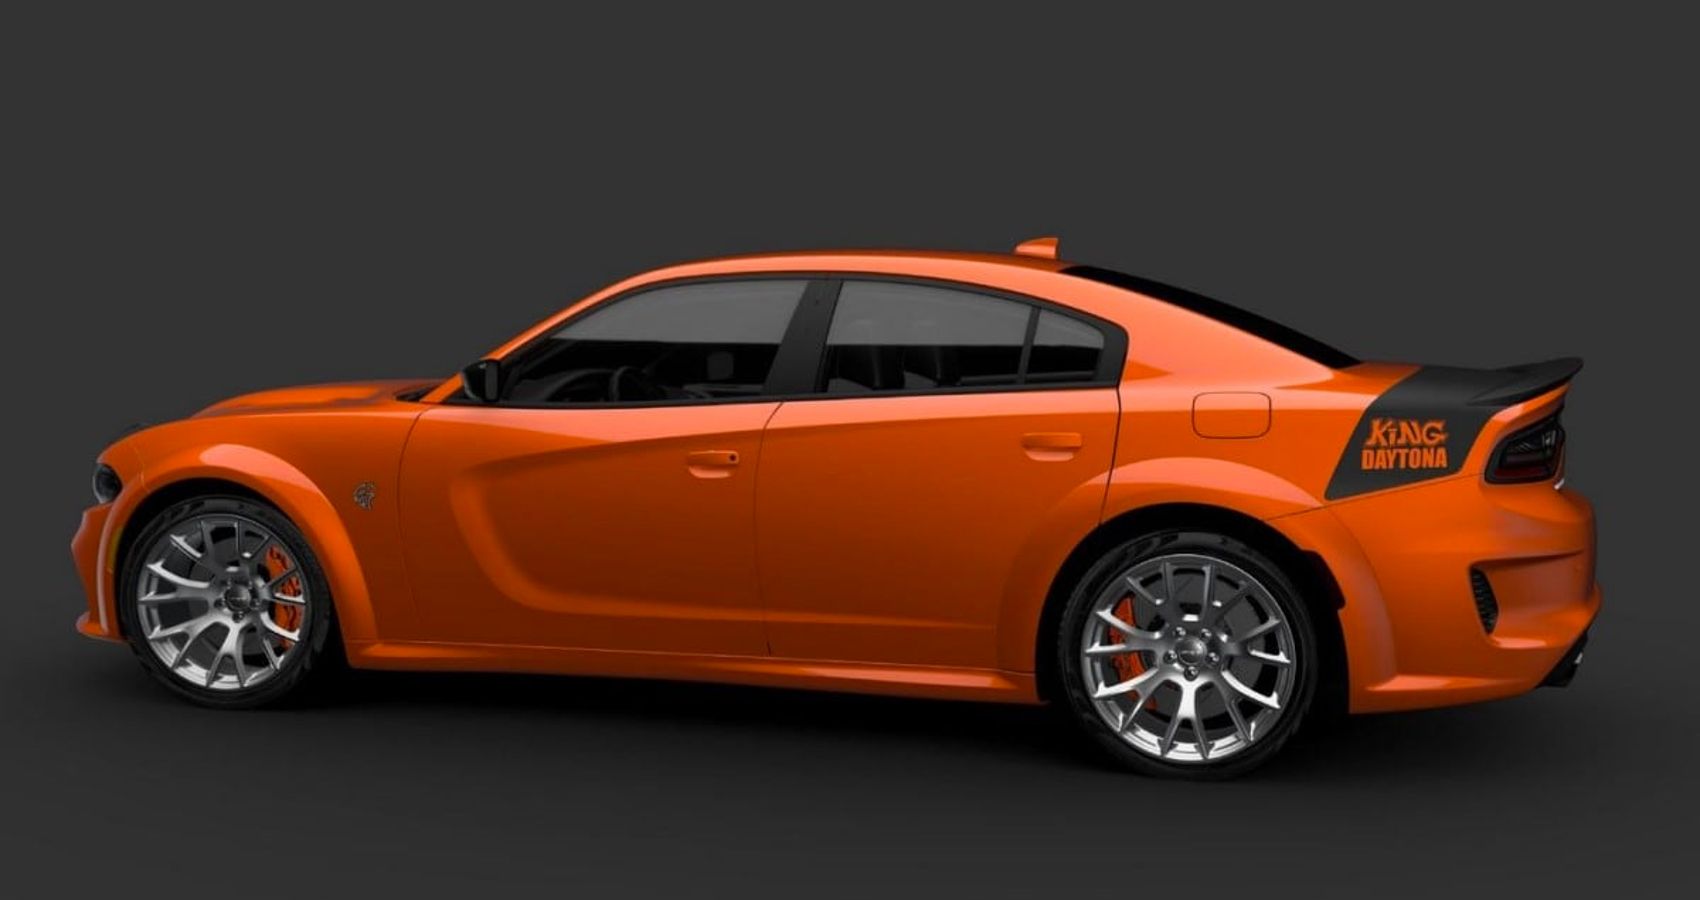 Here’s What Makes The 2023 Dodge Charger King Daytona So Special